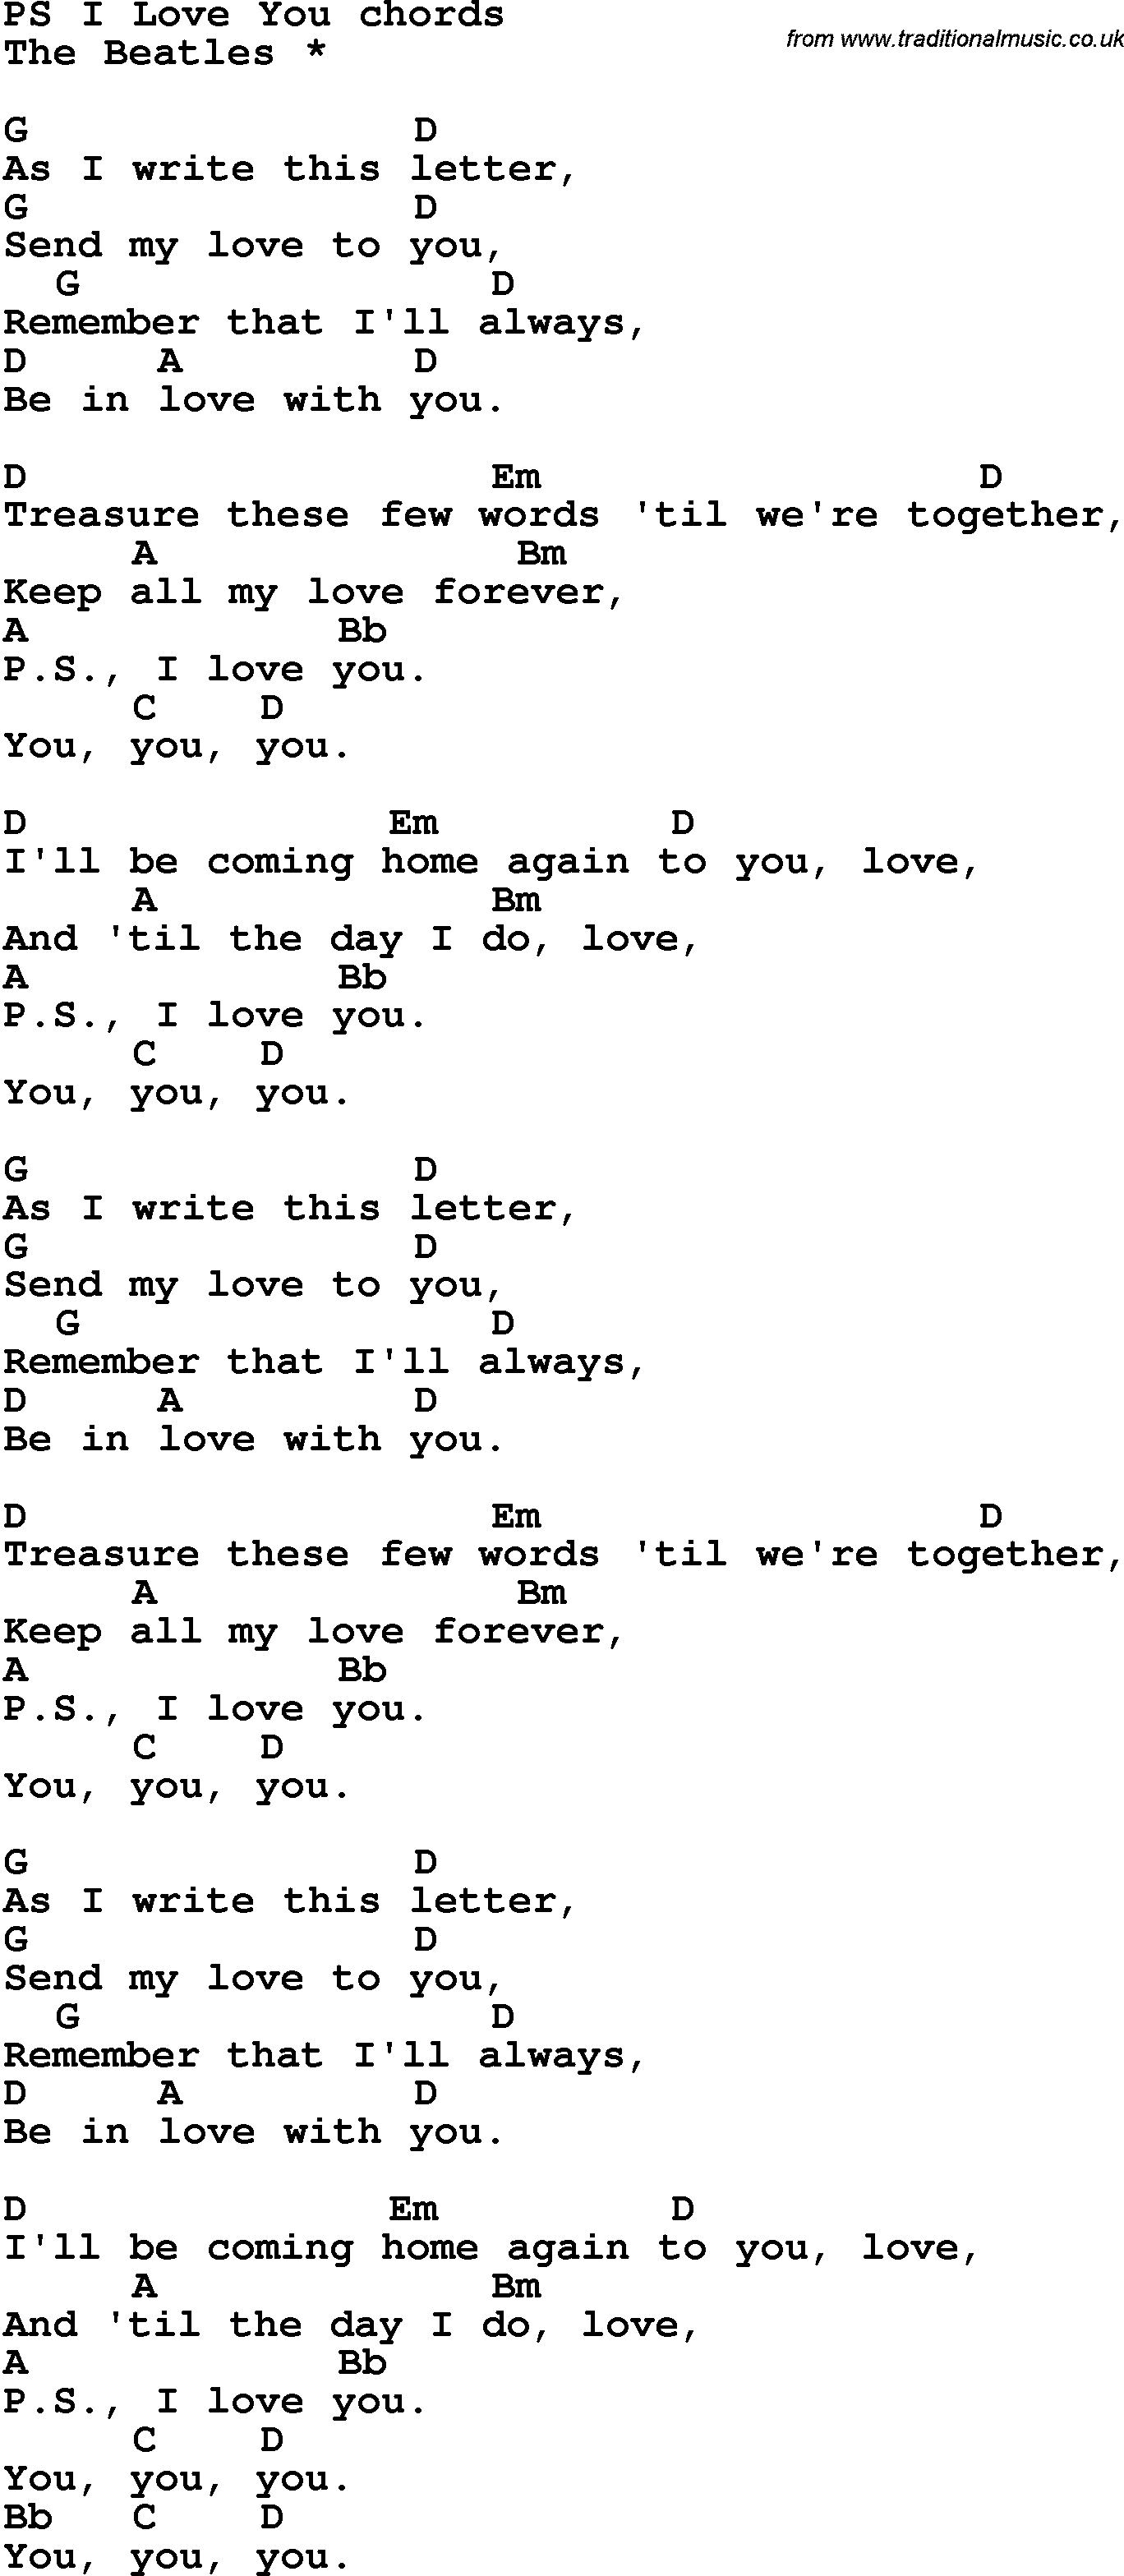 Song Lyrics with guitar chords for Ps I Love You - The Beatles